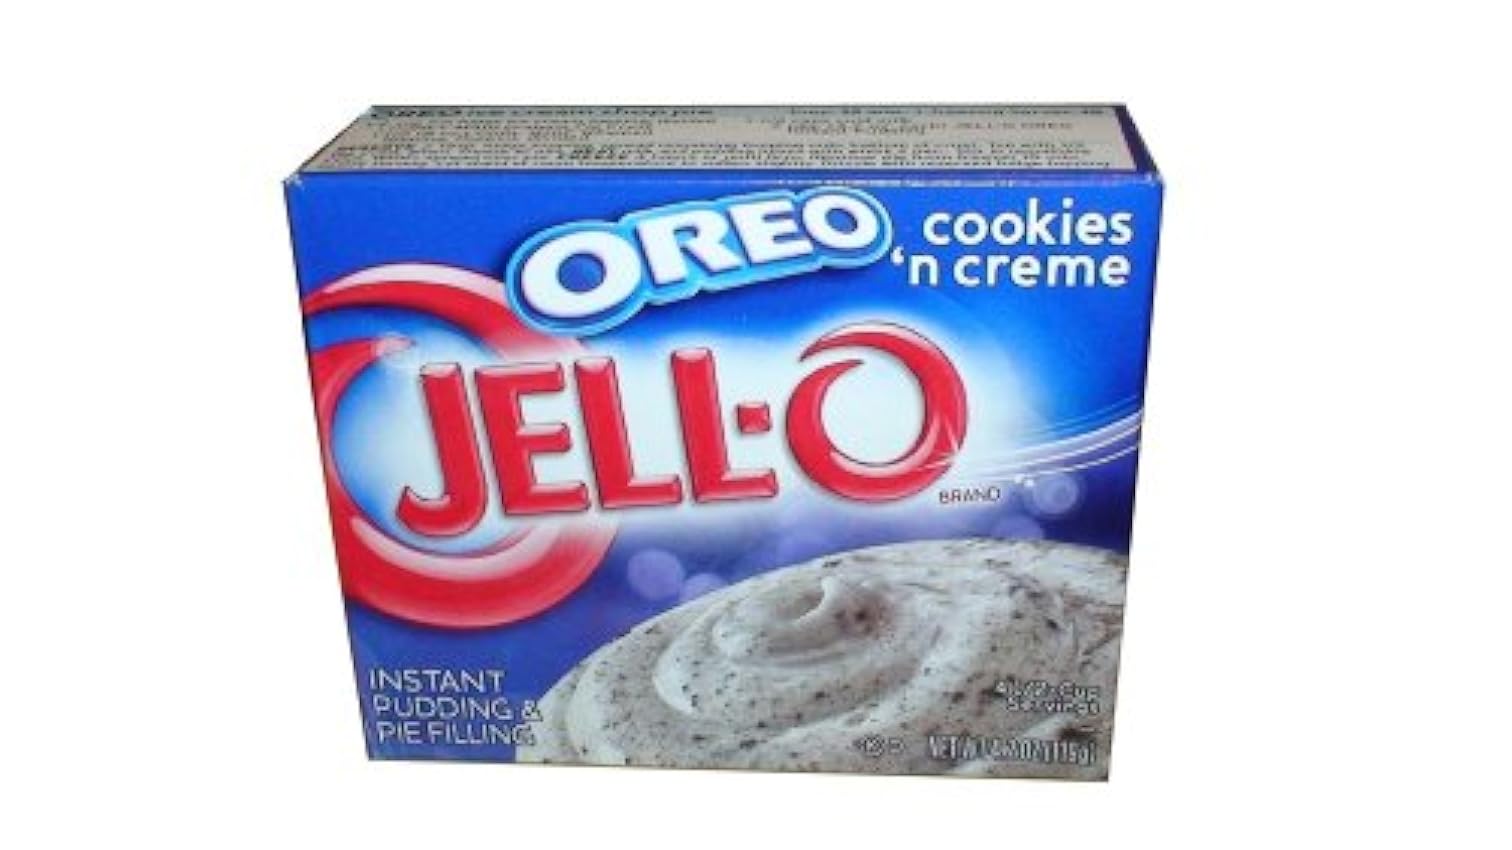 Jell-O Oreo Cookies and Cream Instant Pudding and Pie F